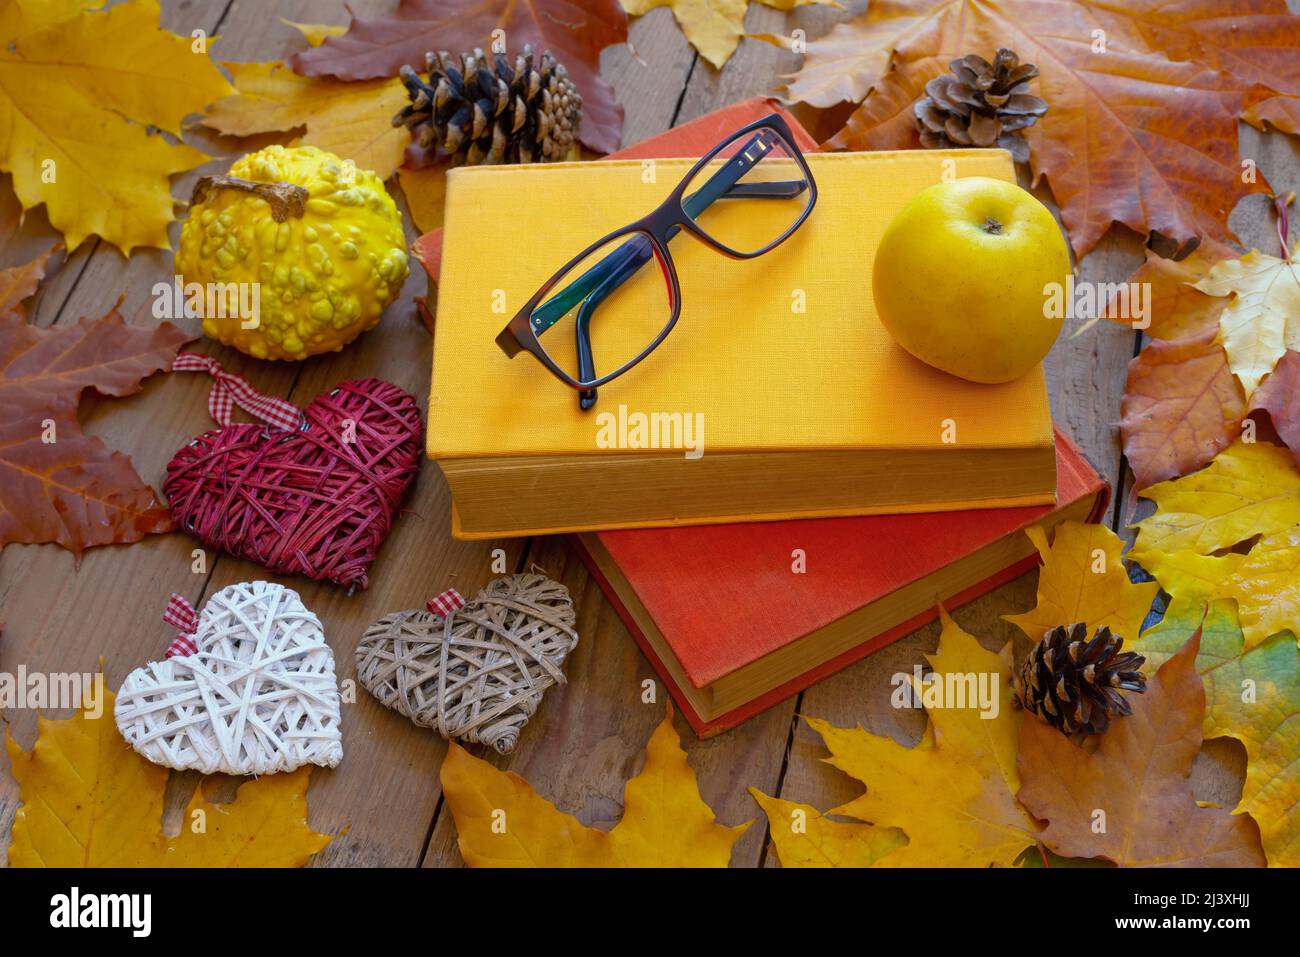 Autumn background. Old books, apple, glasses and decorative hearts on wooden planks with autumn leaves. Autumn design concept. Stock Photo